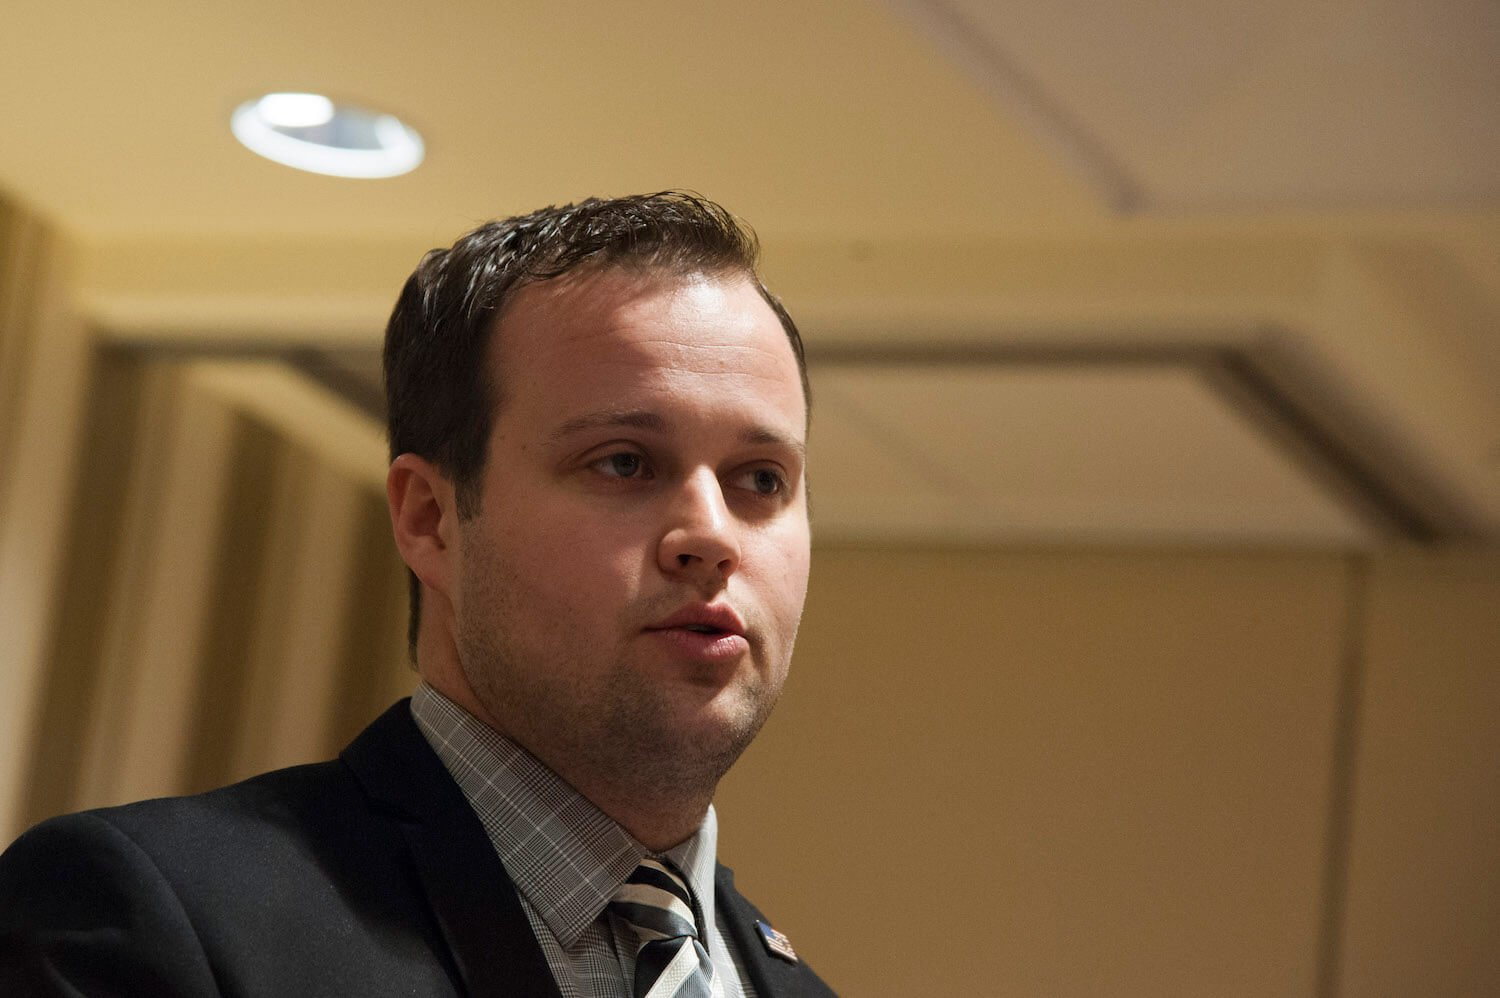 A close-up of Josh Duggar from the Duggar family wearing a suit and tie